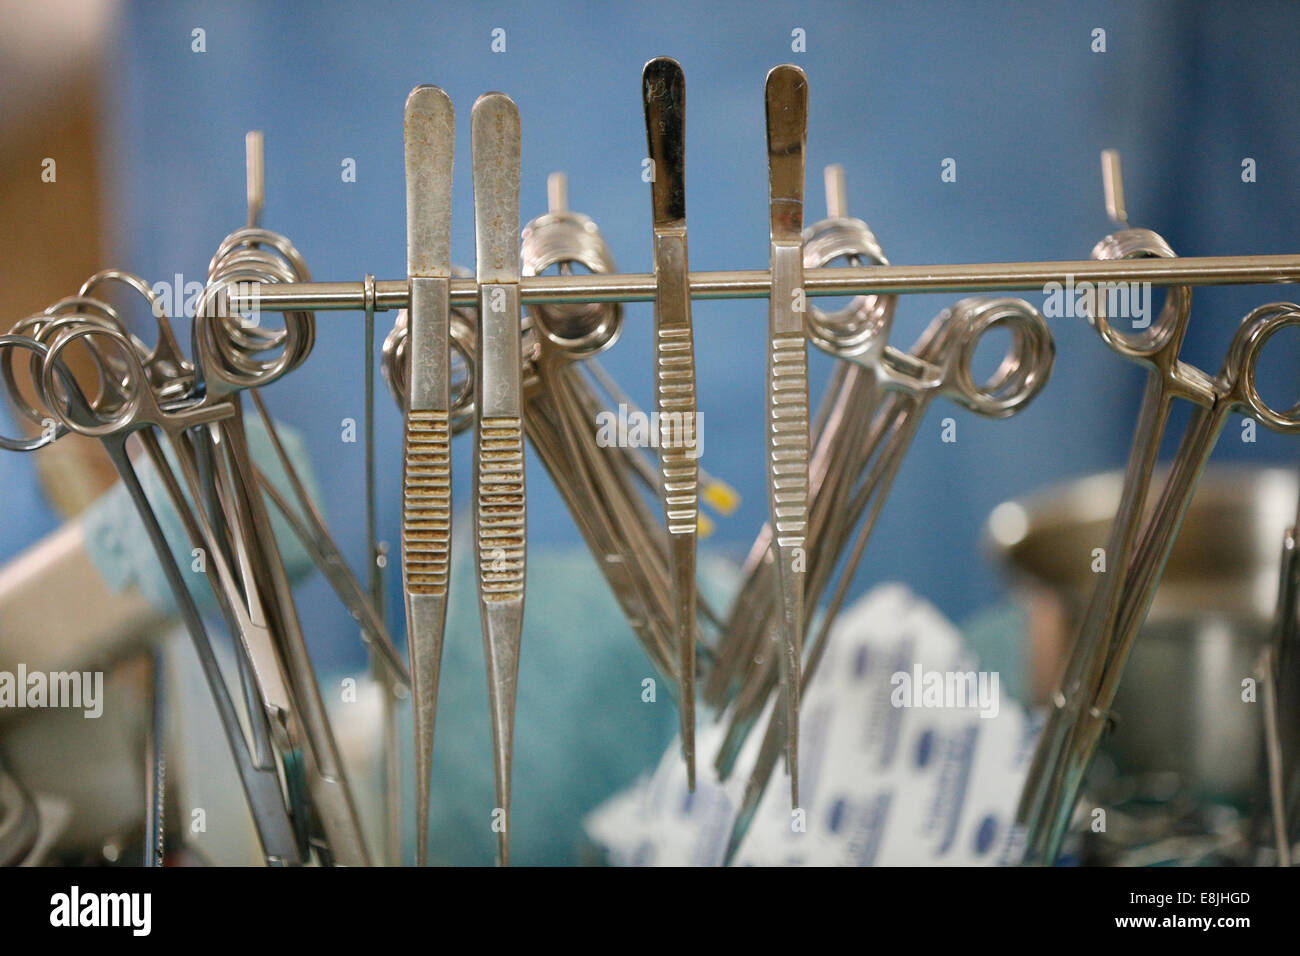 Surgical instruments. Operating theatre. Fann hospital Stock Photo